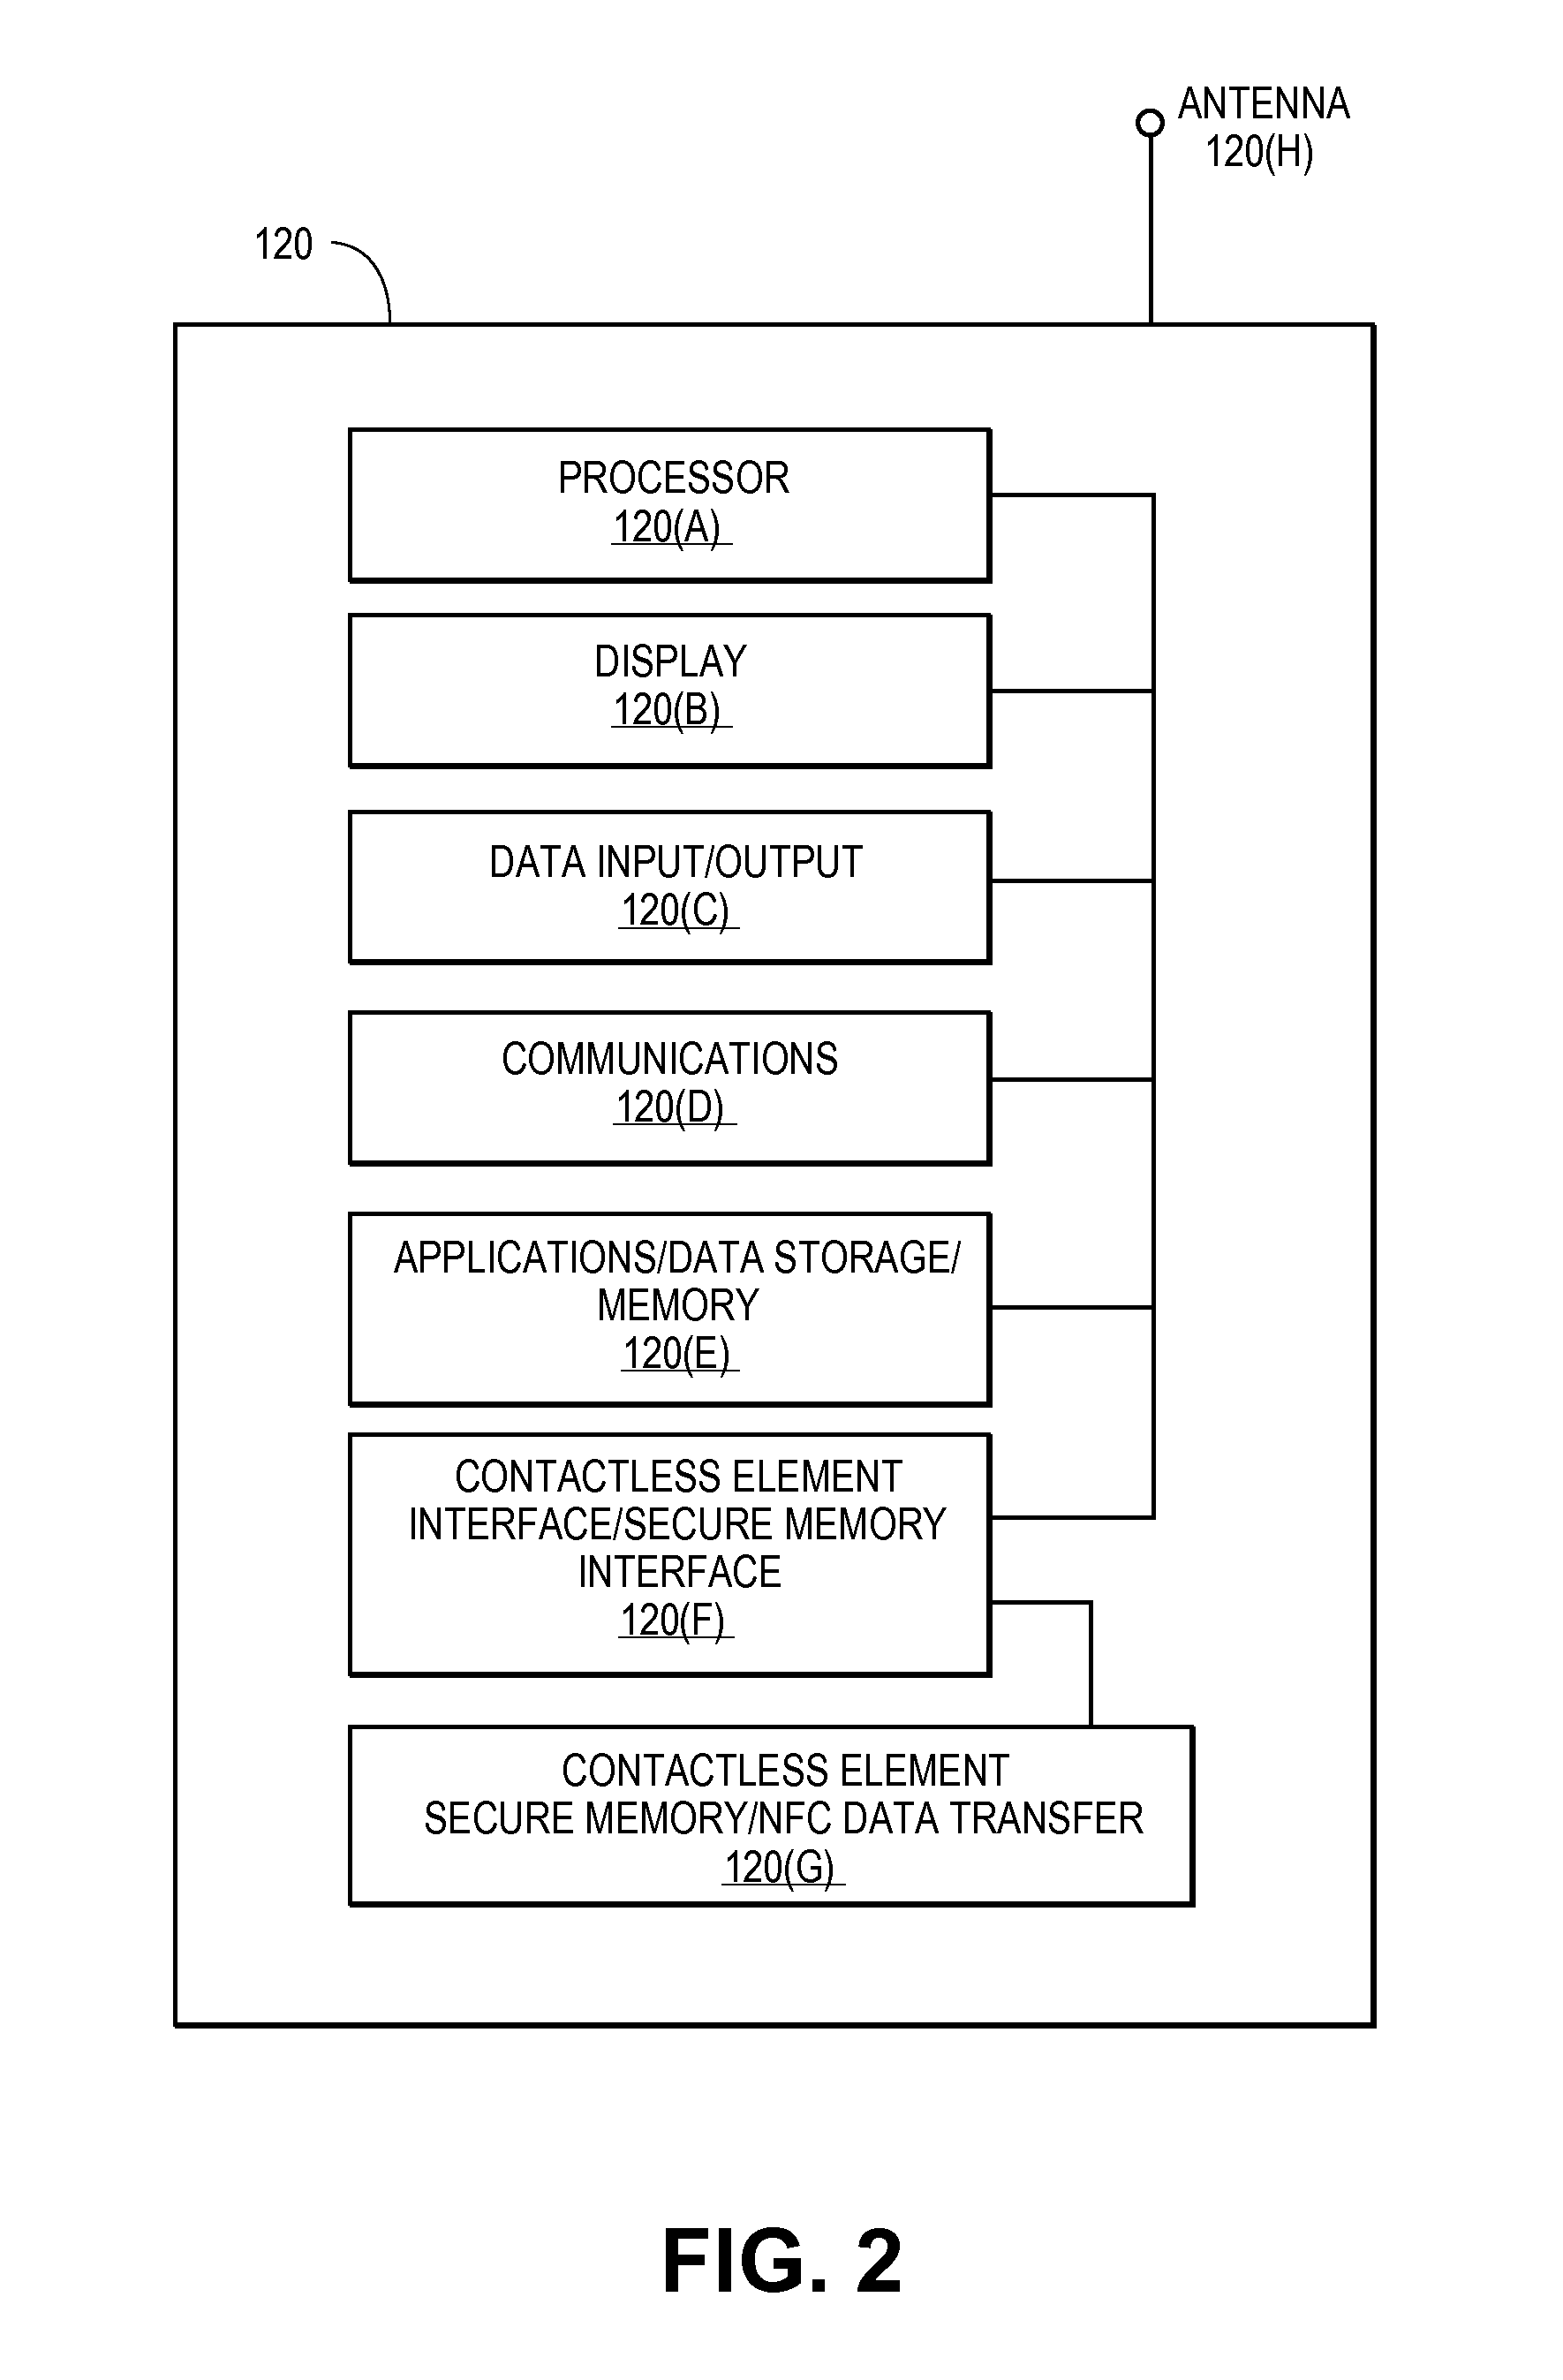 Secure Remote Payment Transaction Processing Using a Secure Element